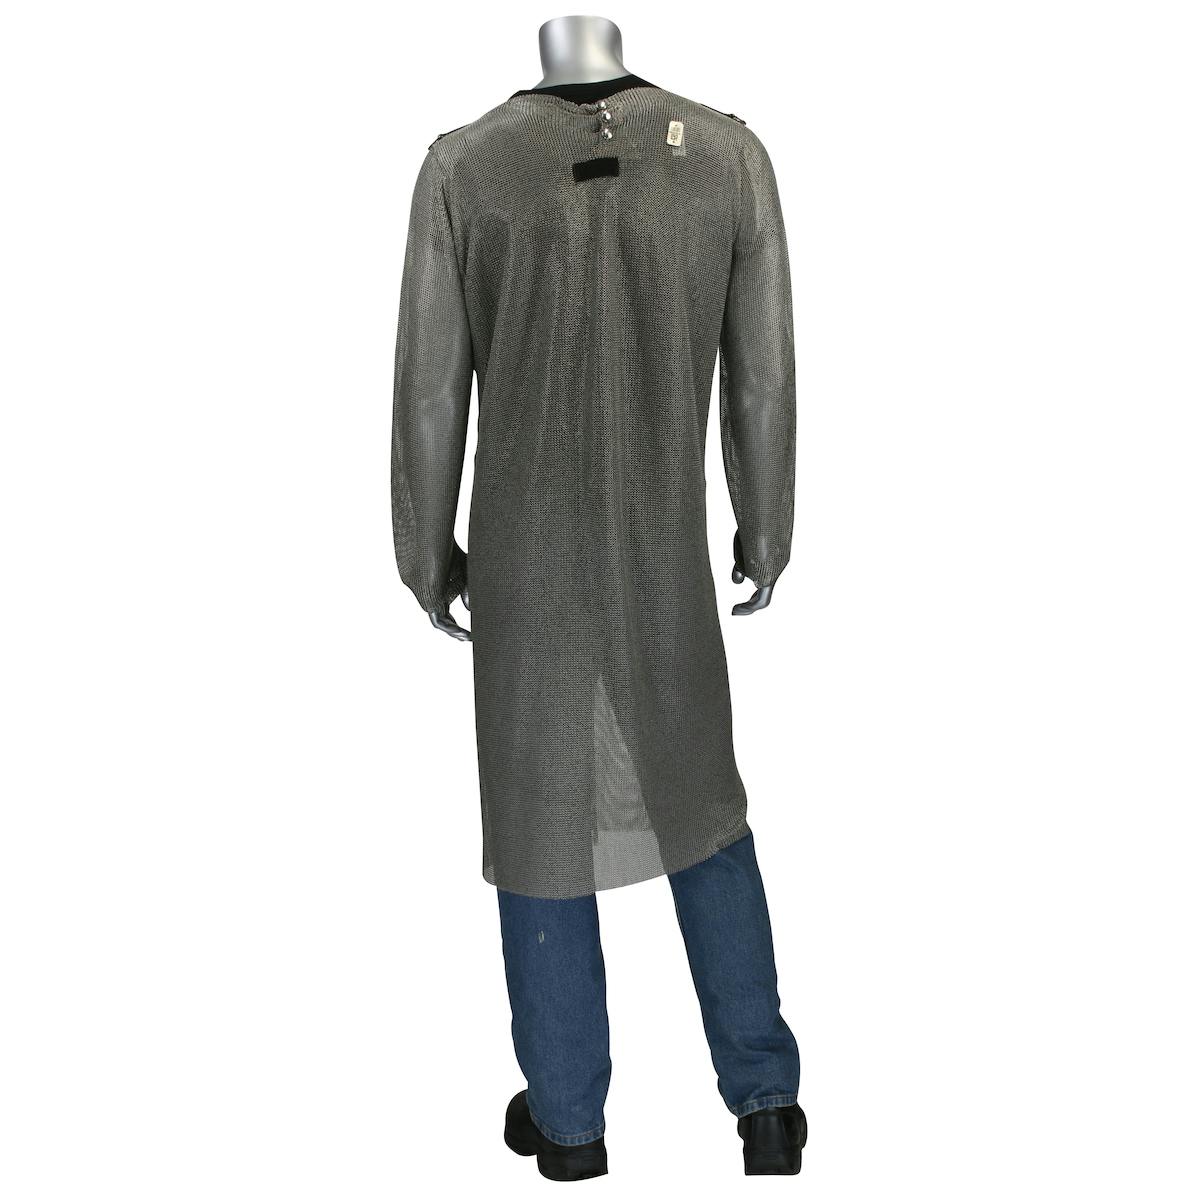 Stainless Steel Mesh Full Body Tunic with Sleeves, Silver (USM-4300L)_0